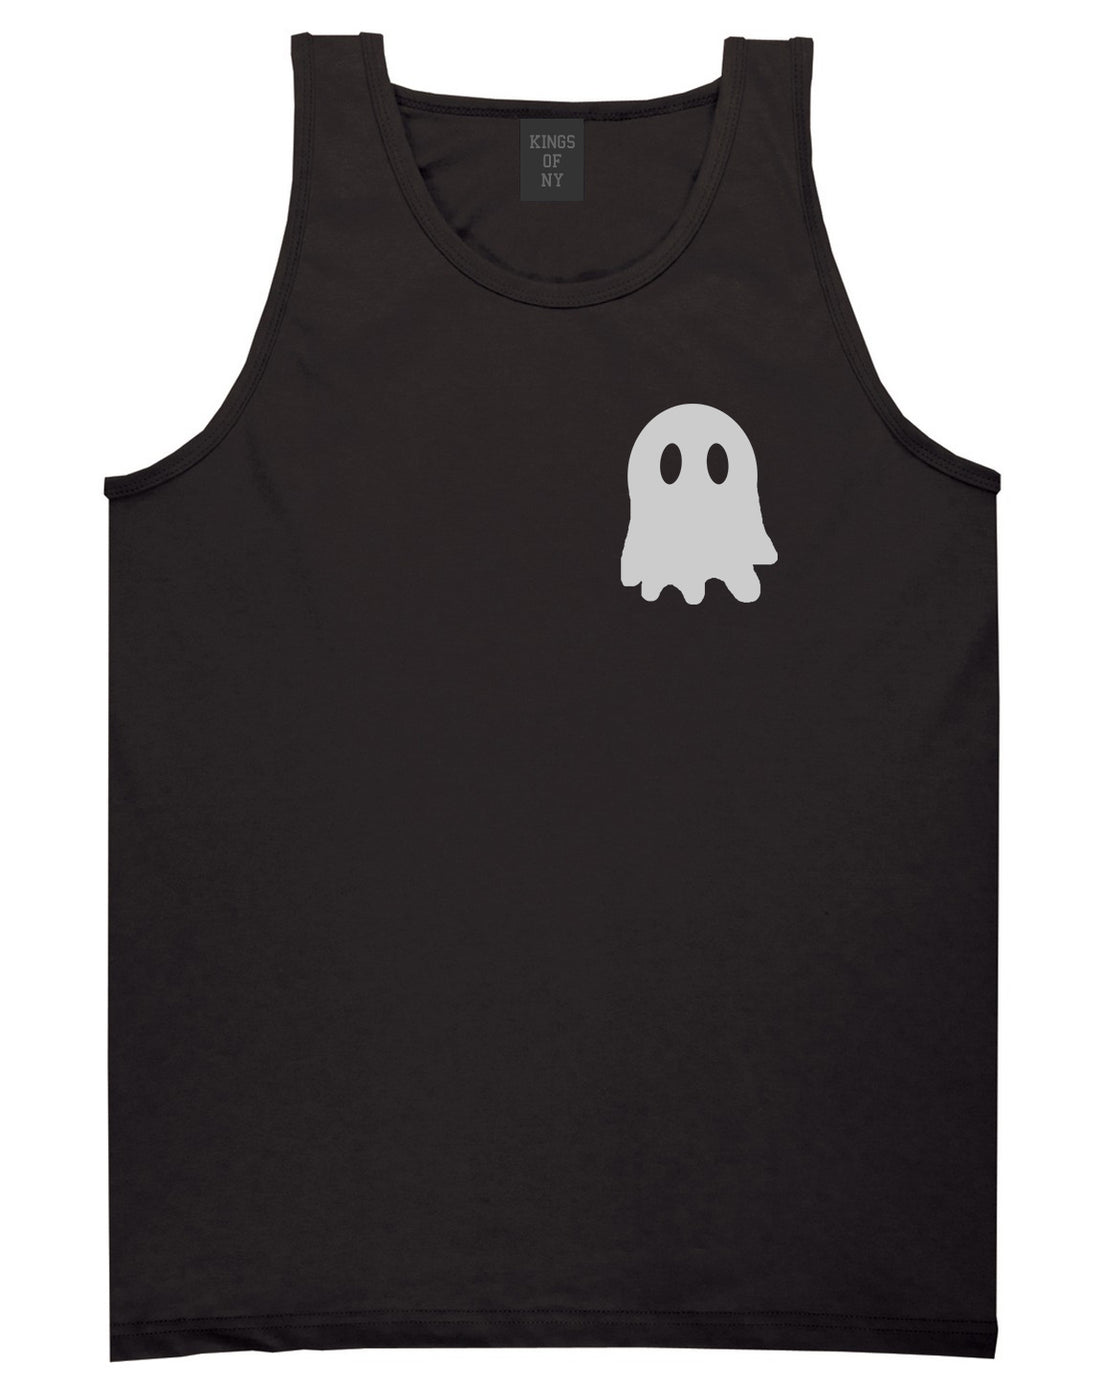 Ghost Chest Mens Black Tank Top Shirt by KINGS OF NY